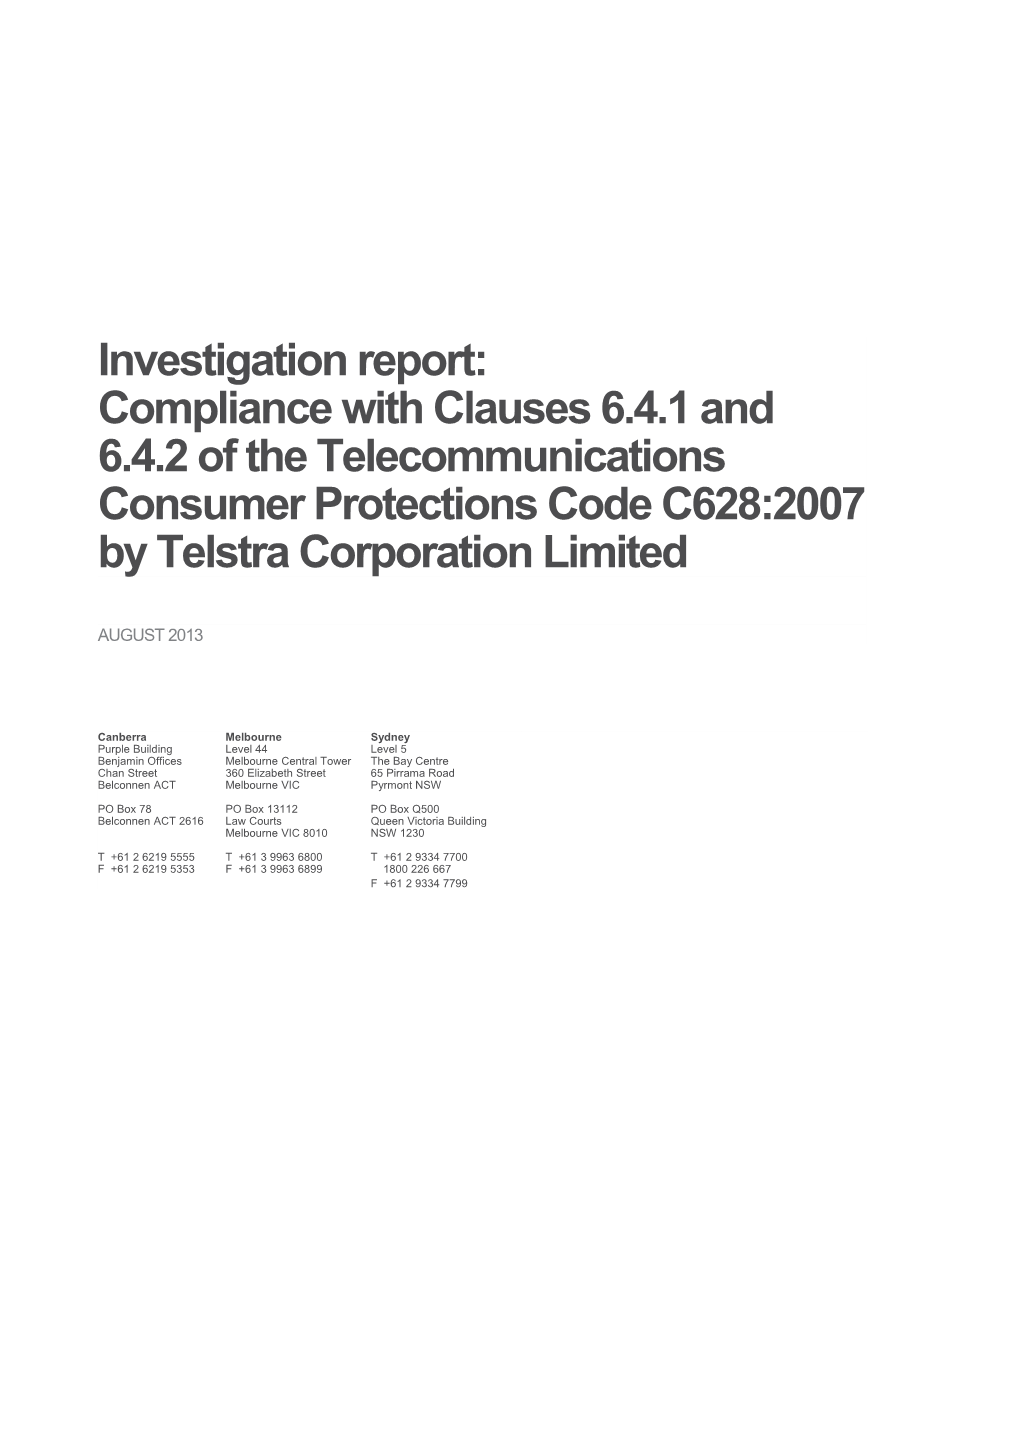 Investigation Report: Compliance with Clauses 6.4.1 and 6.4.2 of the Telecommunications